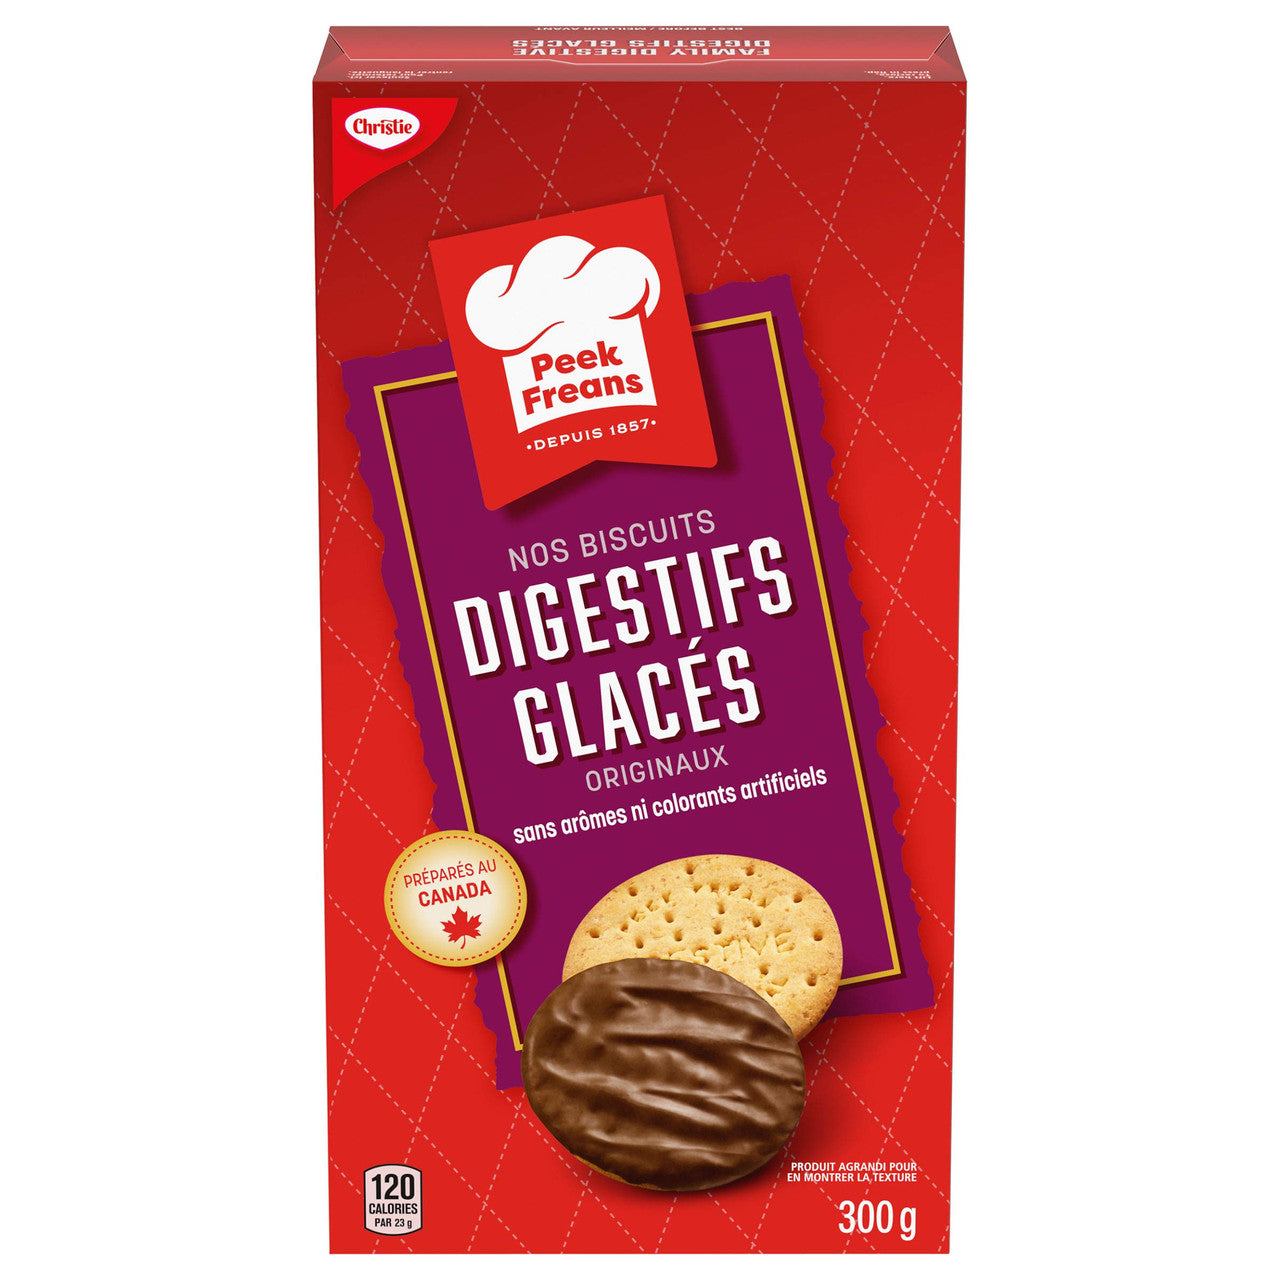 Christie Peek Frean Family Digestive cookies, 300g/10.6oz.(Imported from Canada)